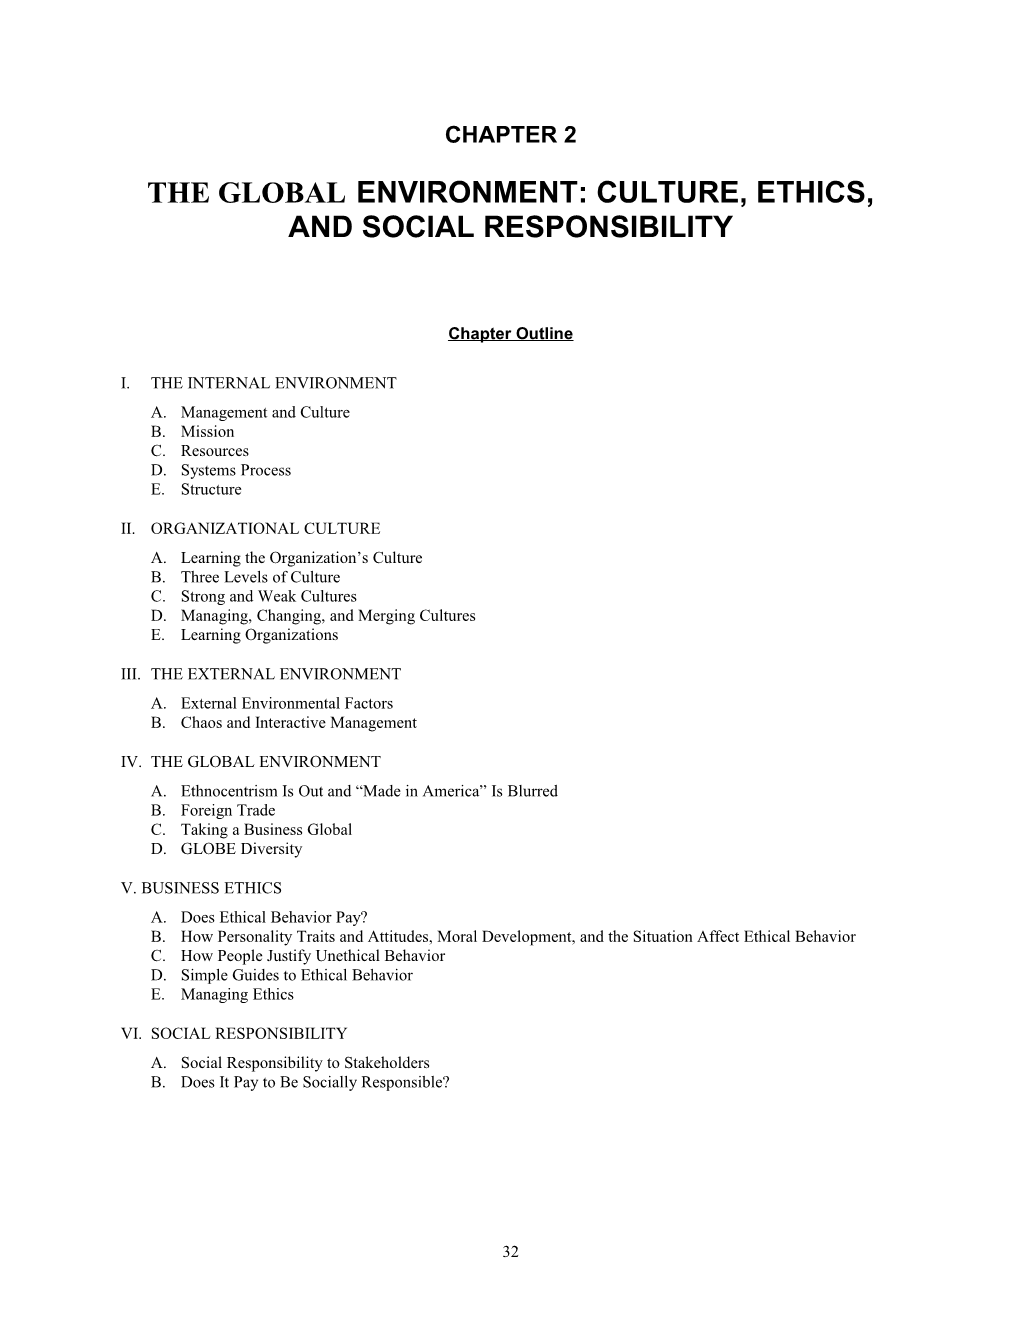 The Globalenvironment: Culture, Ethics, and Social Responsibility